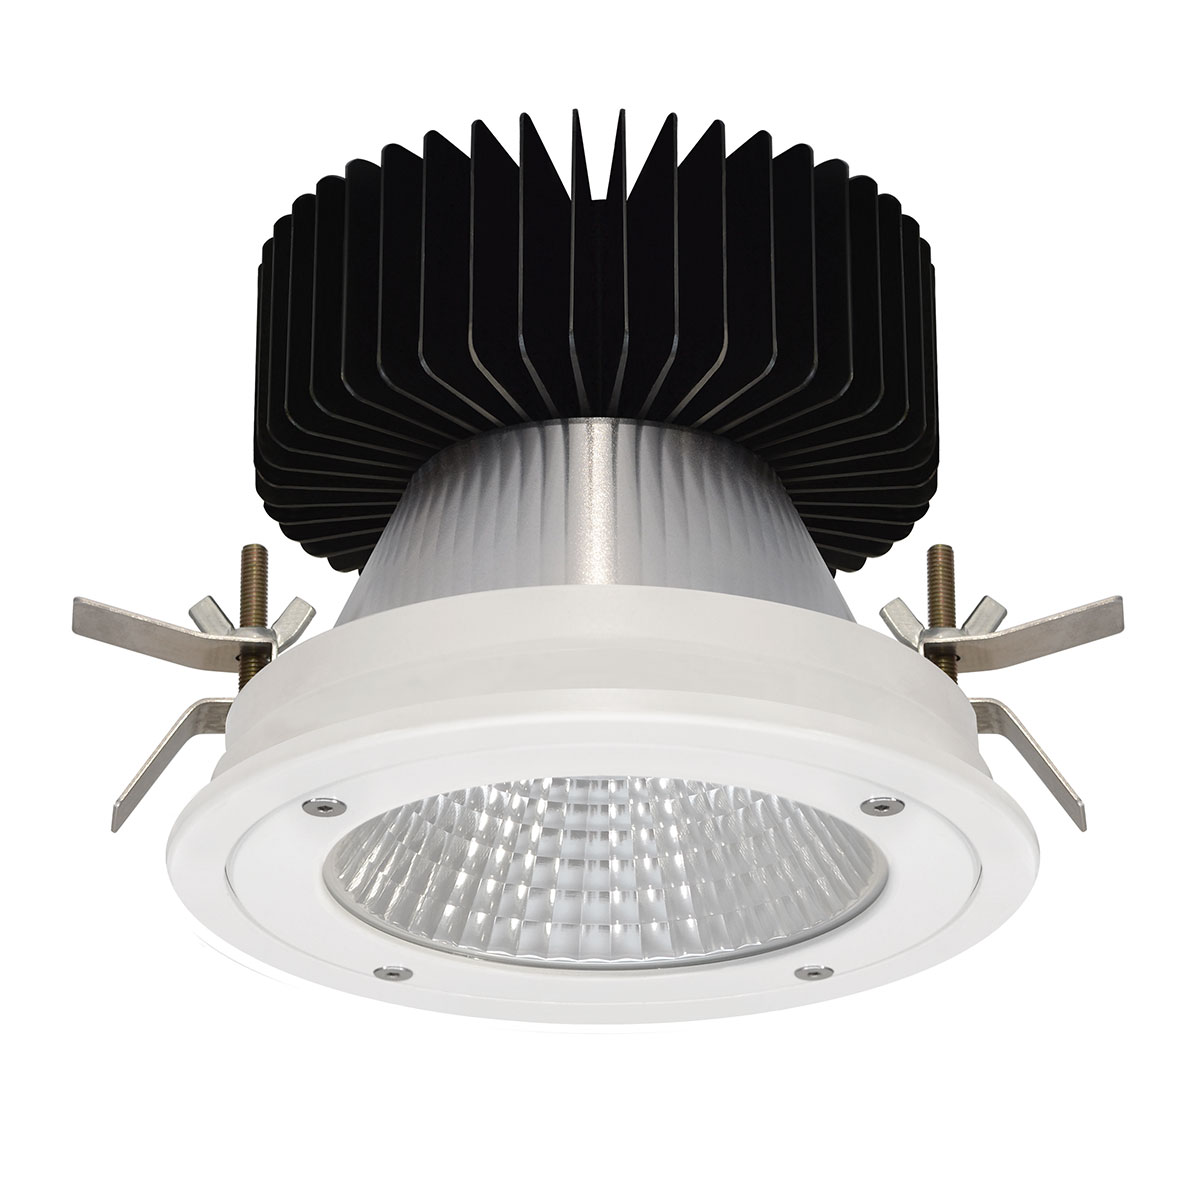 Kopa 16W Anti Tamper Fixed Round Recessed Downlight IP65 Rated 60° Degree Reflector Black